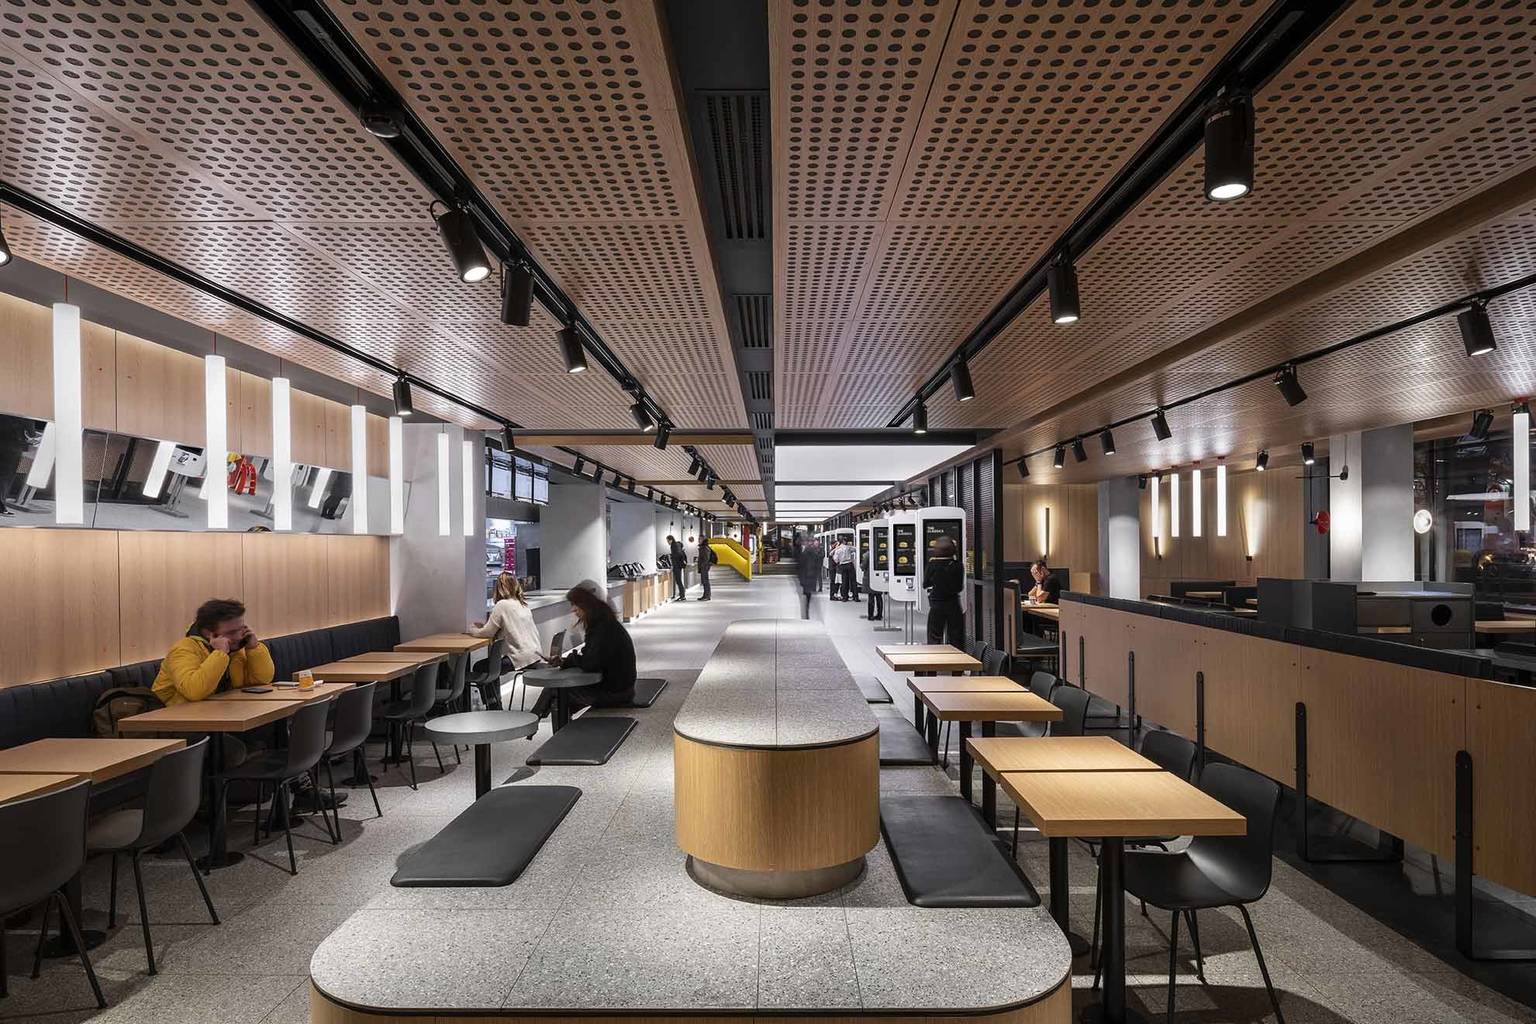 Moscow’s first McDonald's restaurant transformed into an island of calm